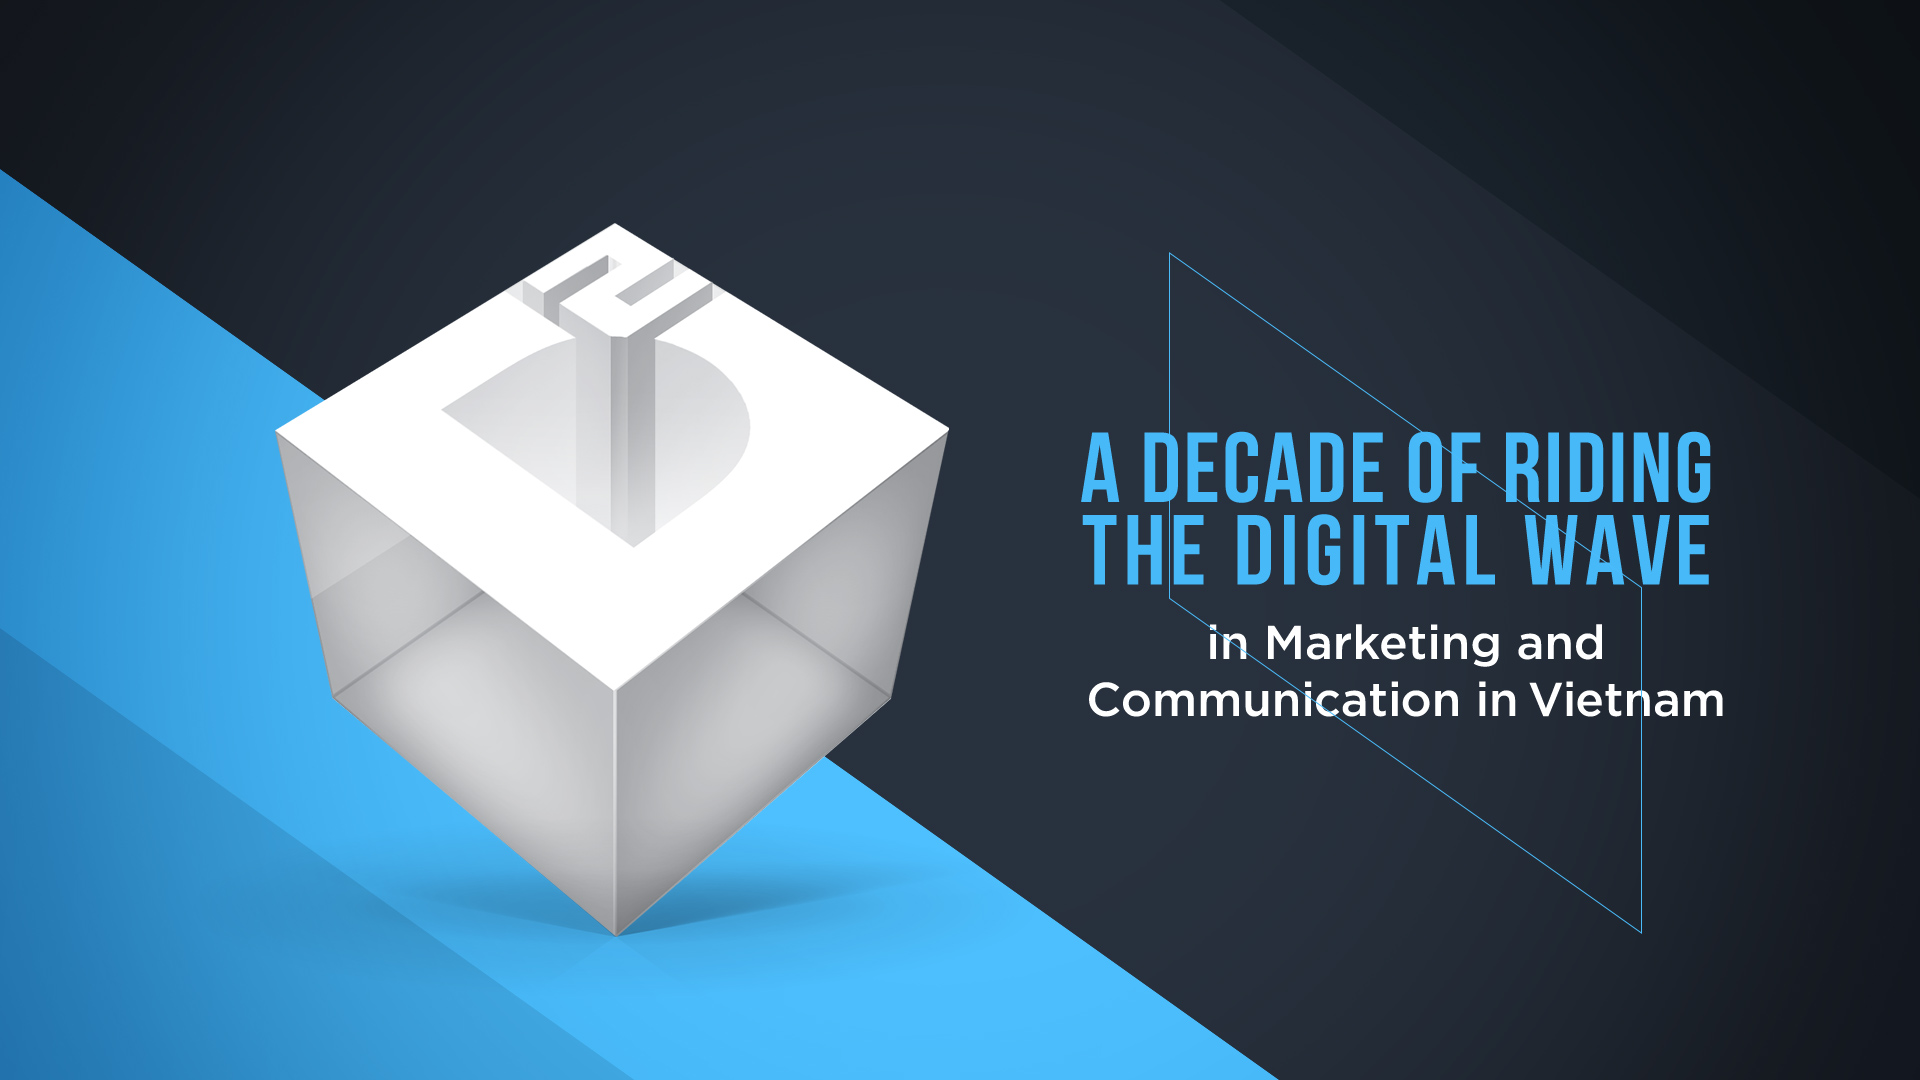 A decade of riding the digital wave